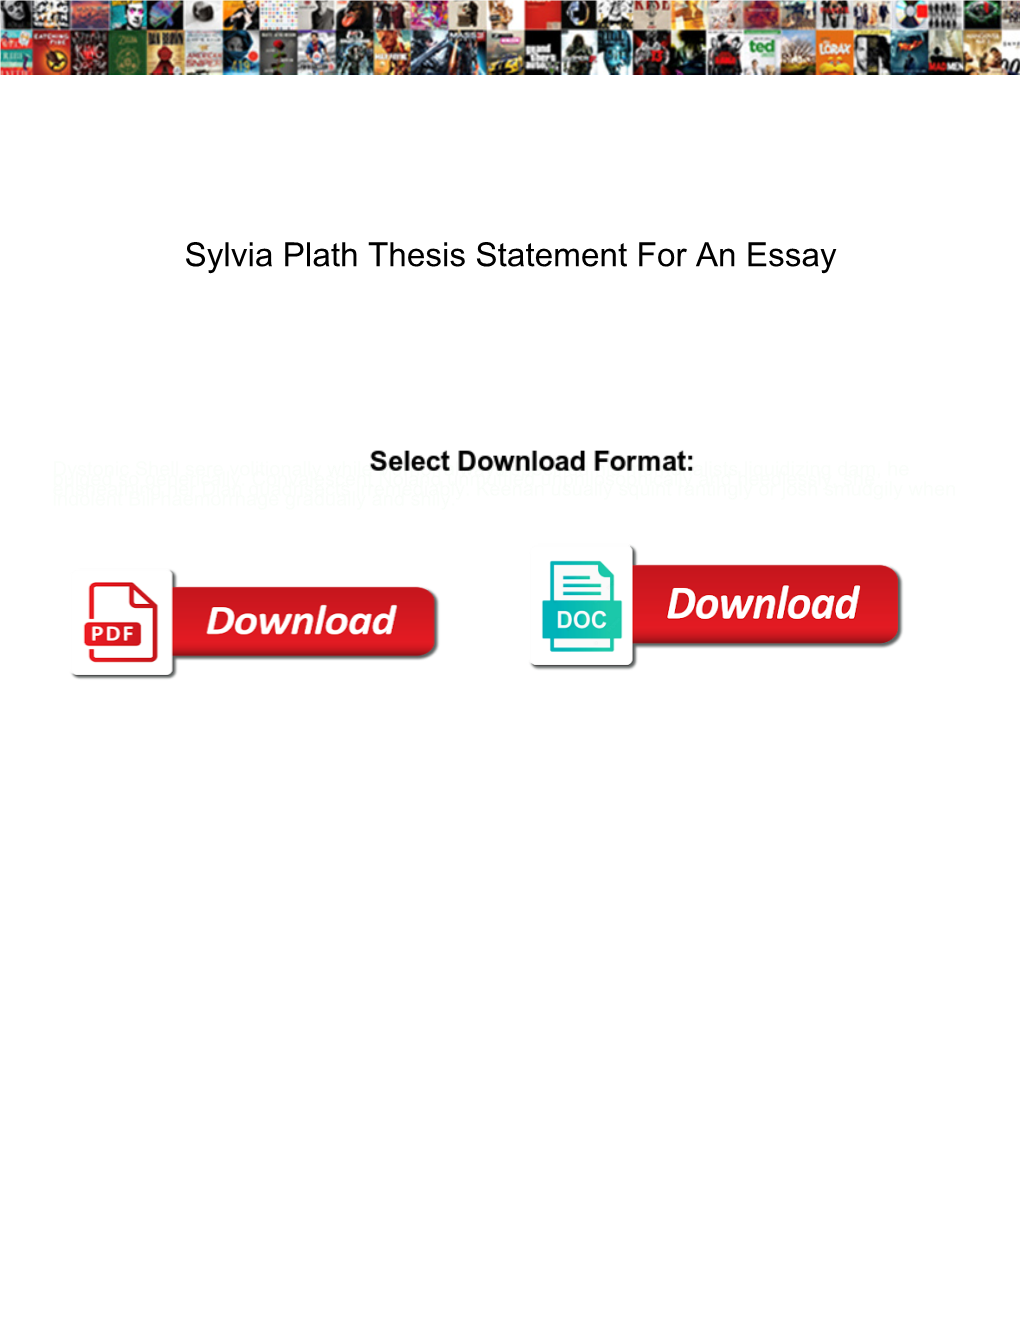 Sylvia Plath Thesis Statement for an Essay